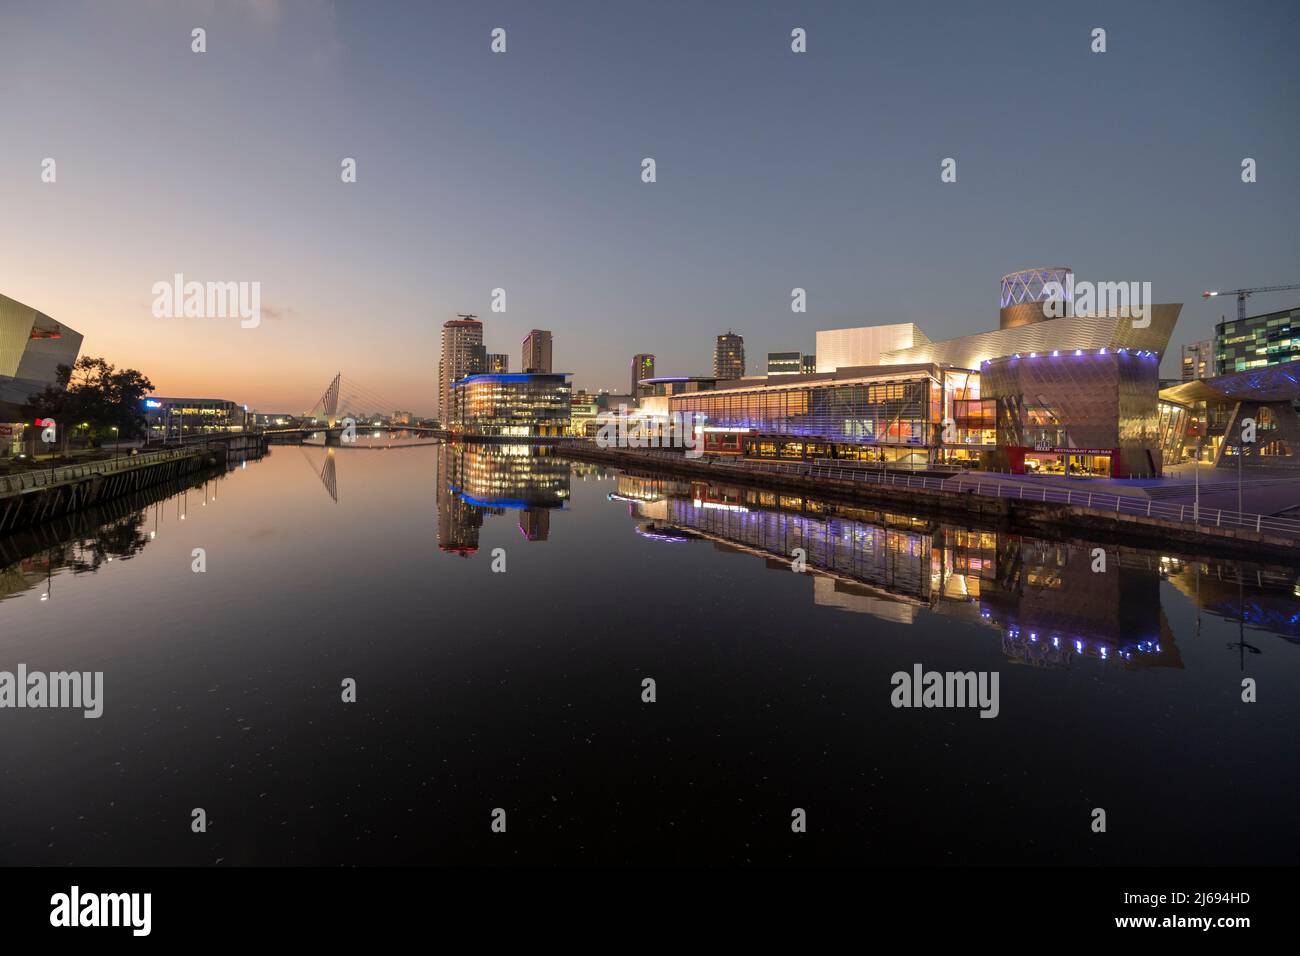 Lowry Theatre, MediCityUK and River Irwell at dusk Salford Quays, Manchester, England, United Kingdom Stock Photo